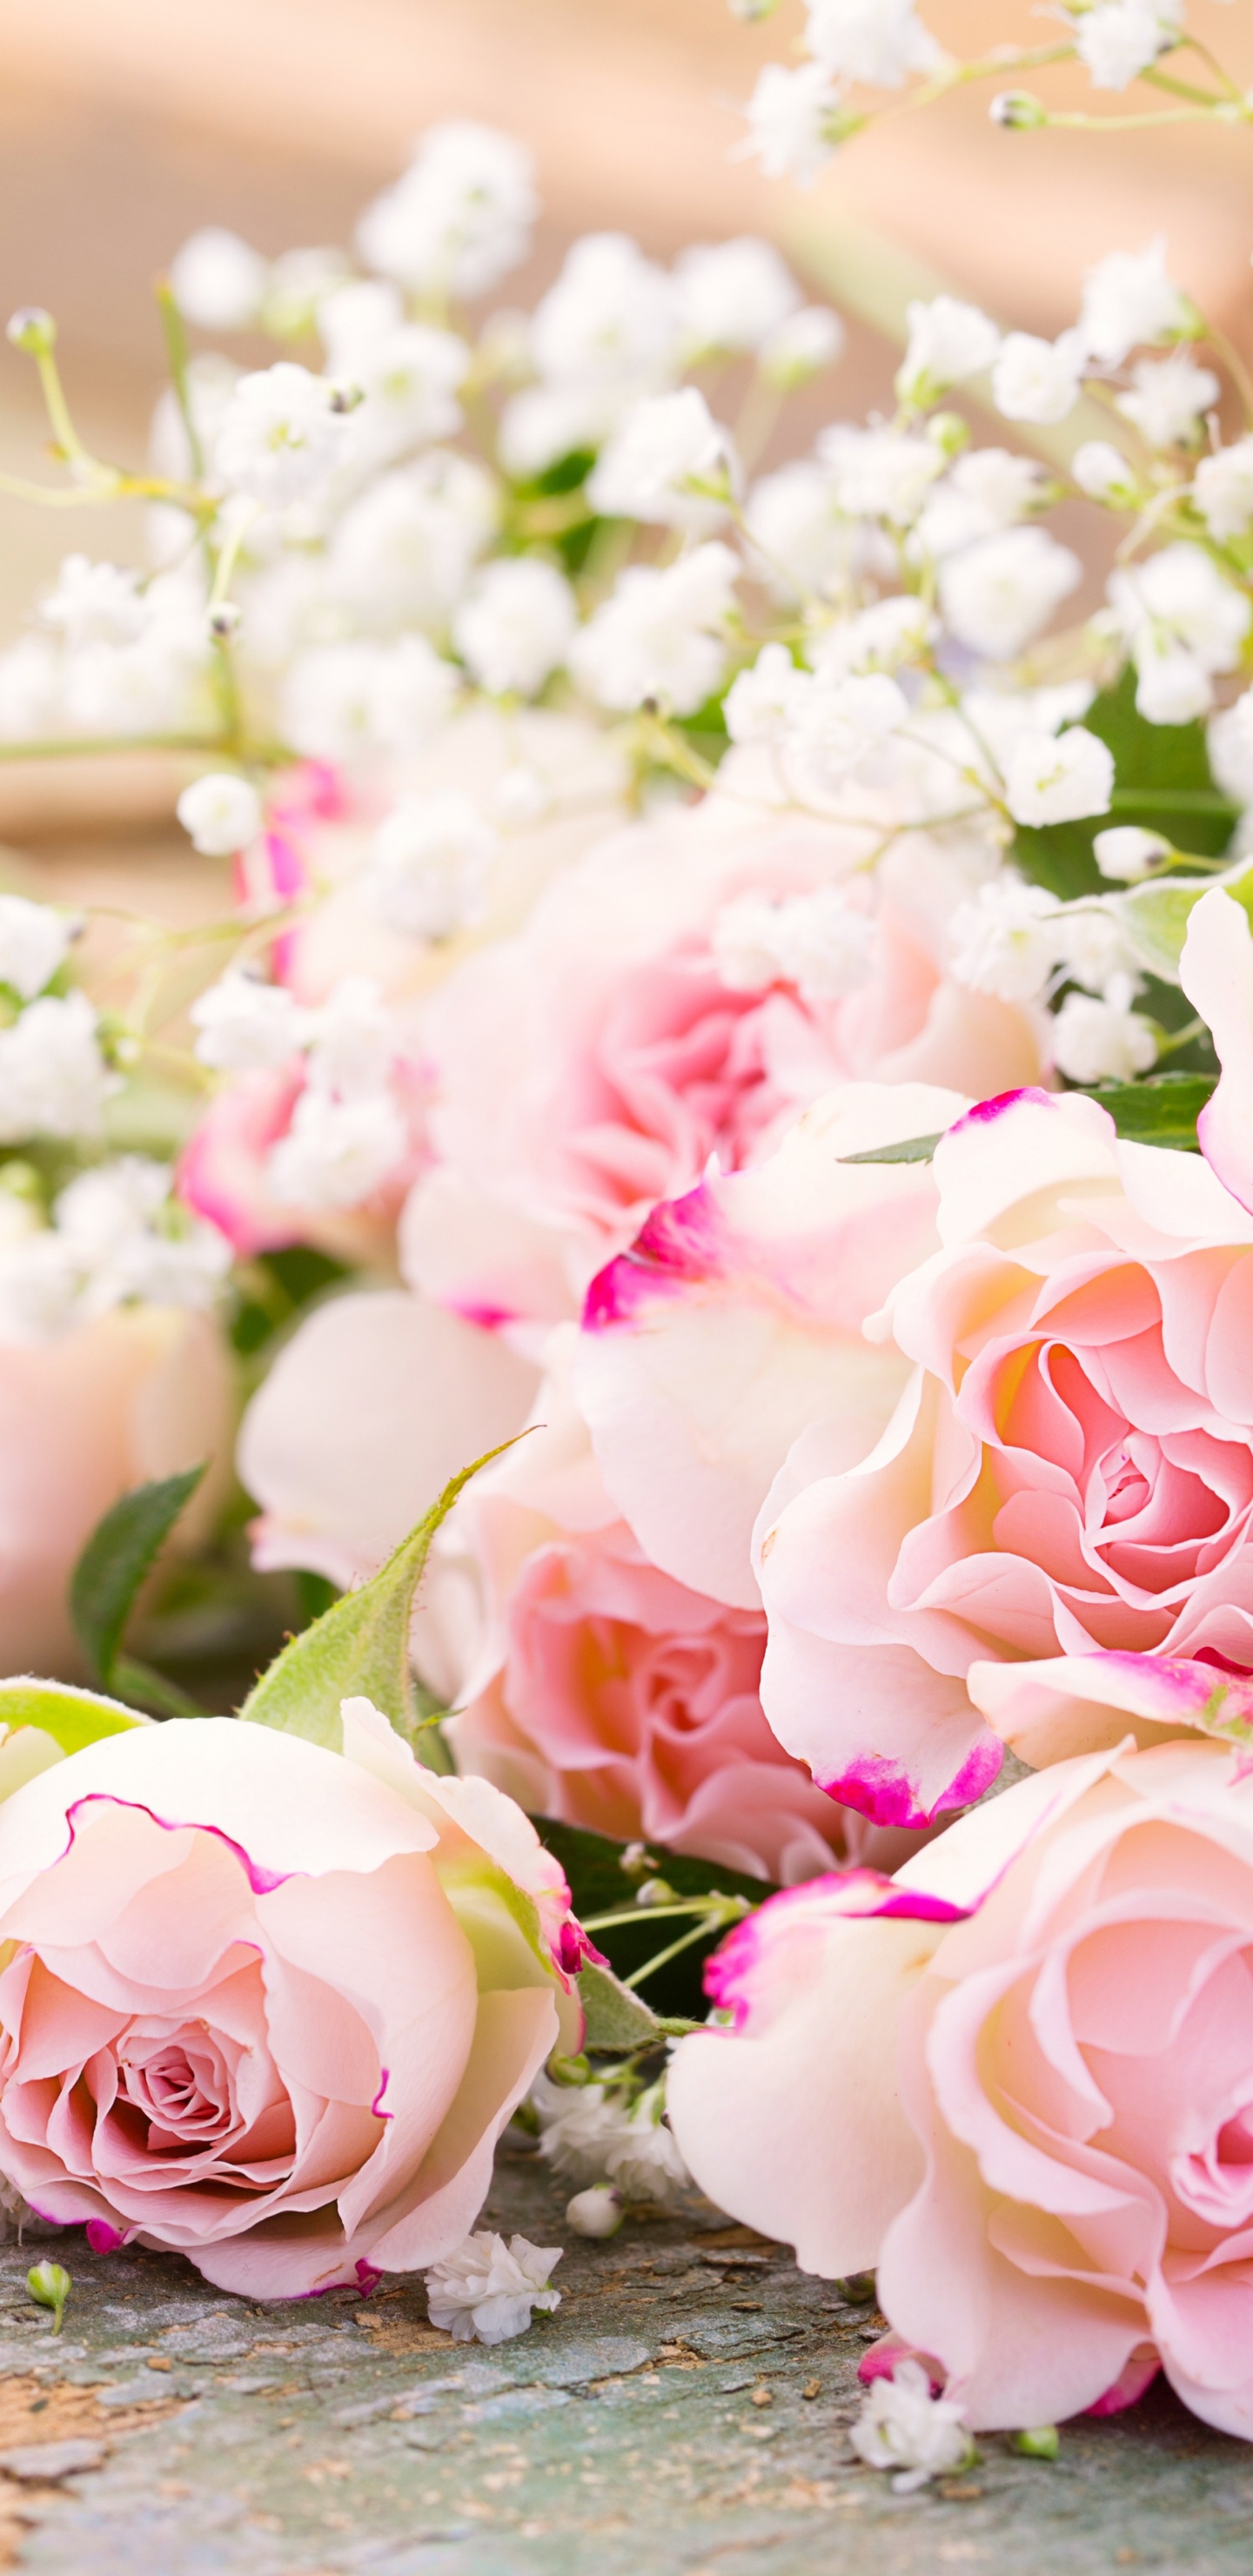 Pink and White Roses Bouquet. Wallpaper in 1440x2960 Resolution